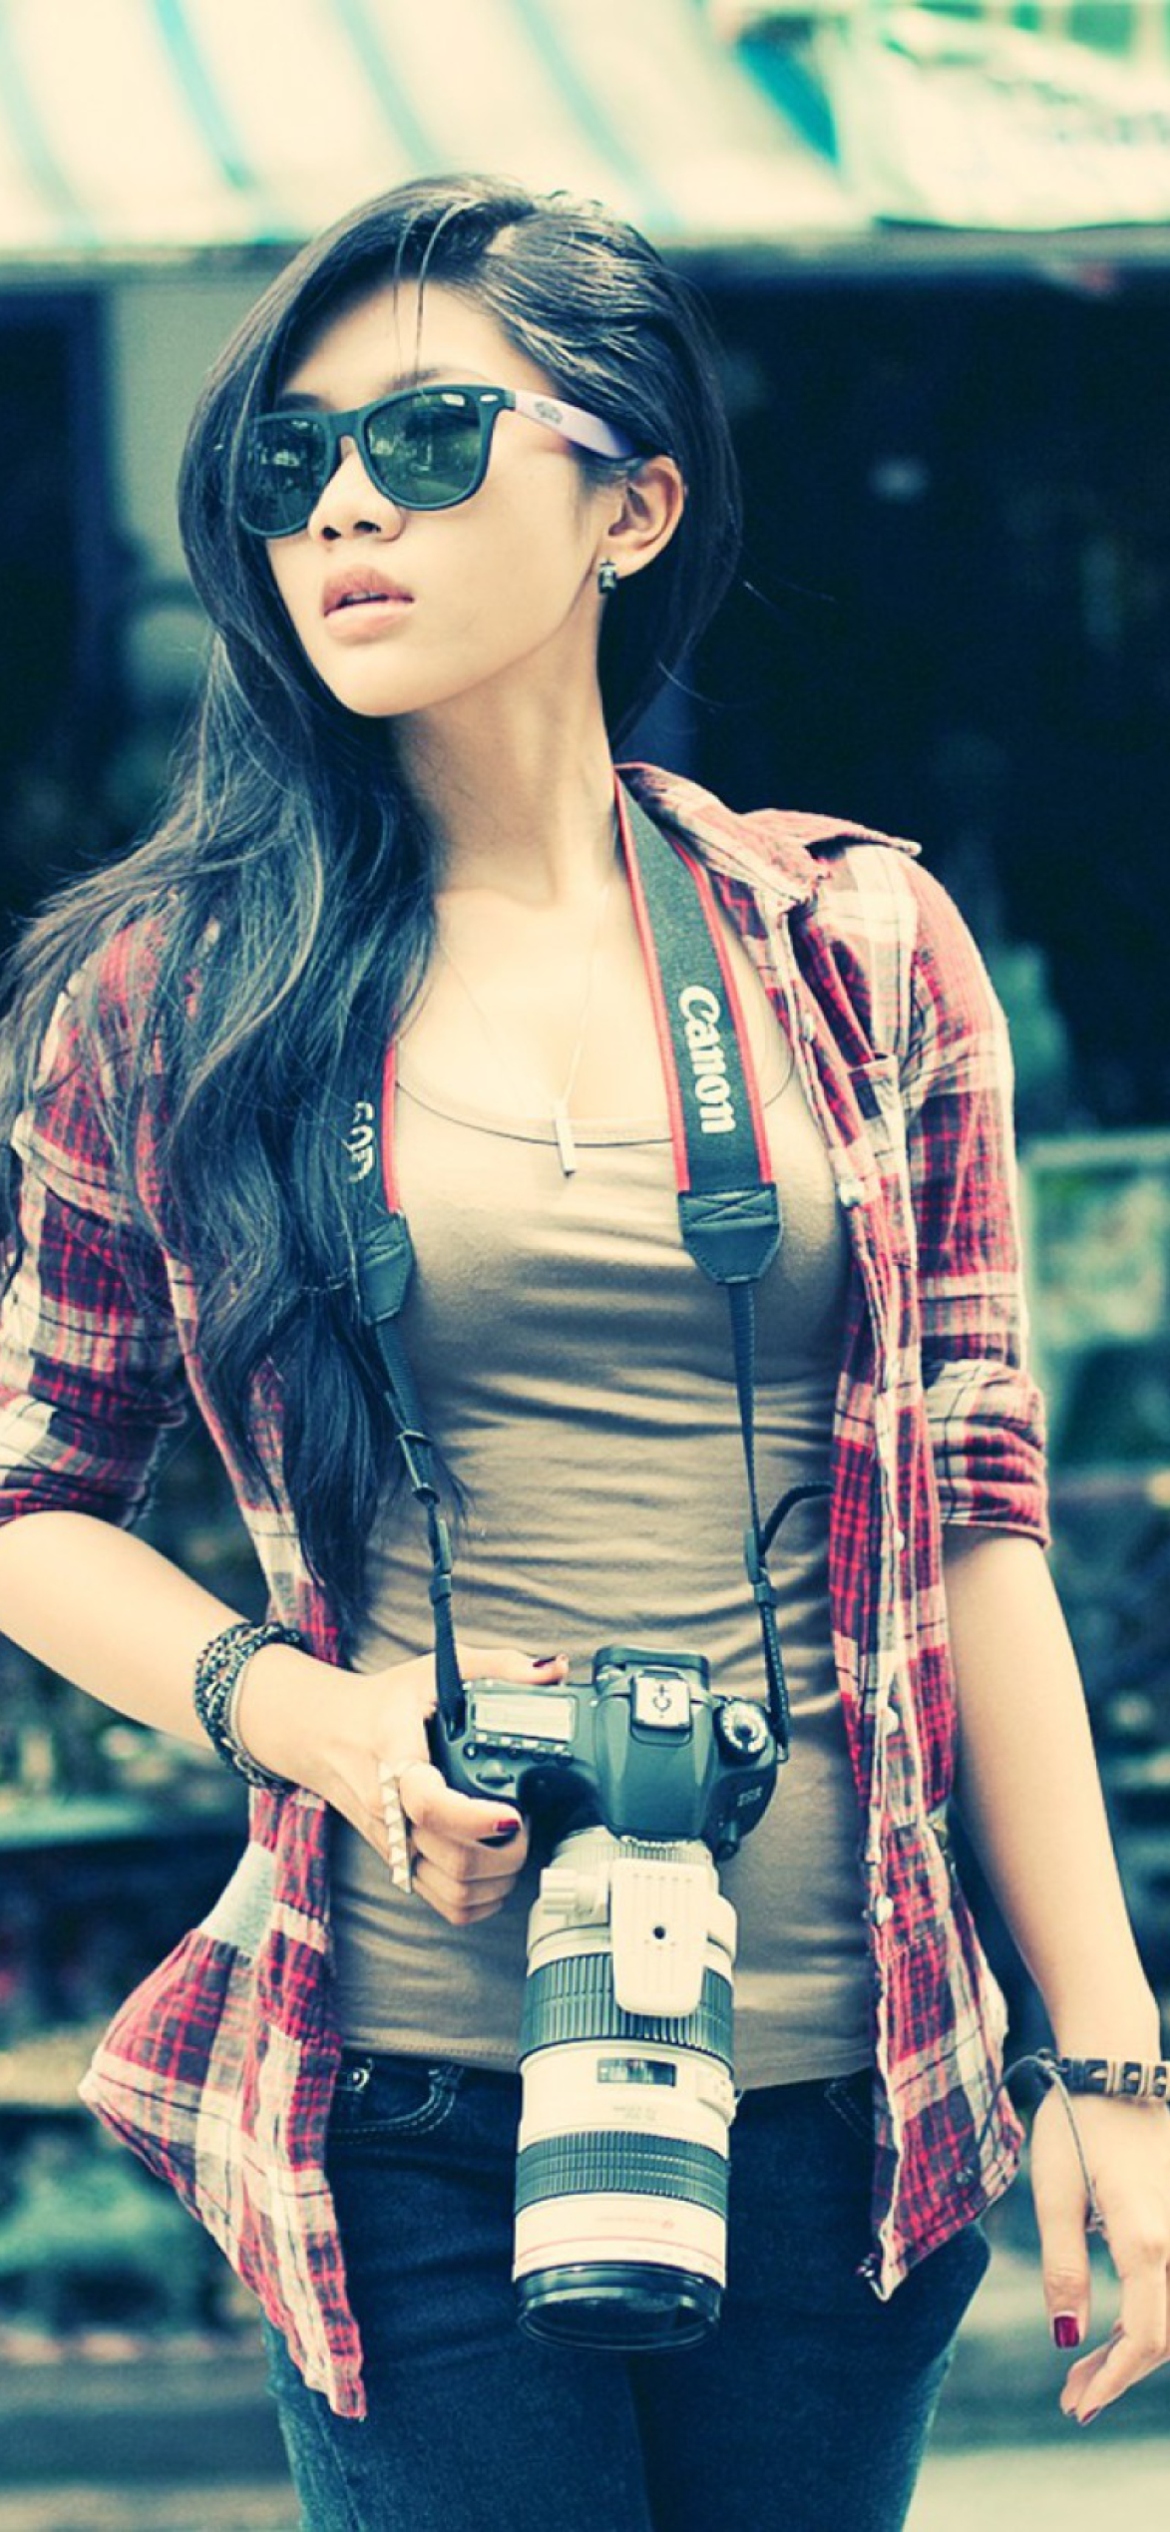 Brunette Asian Girl With Photo Camera wallpaper 1170x2532